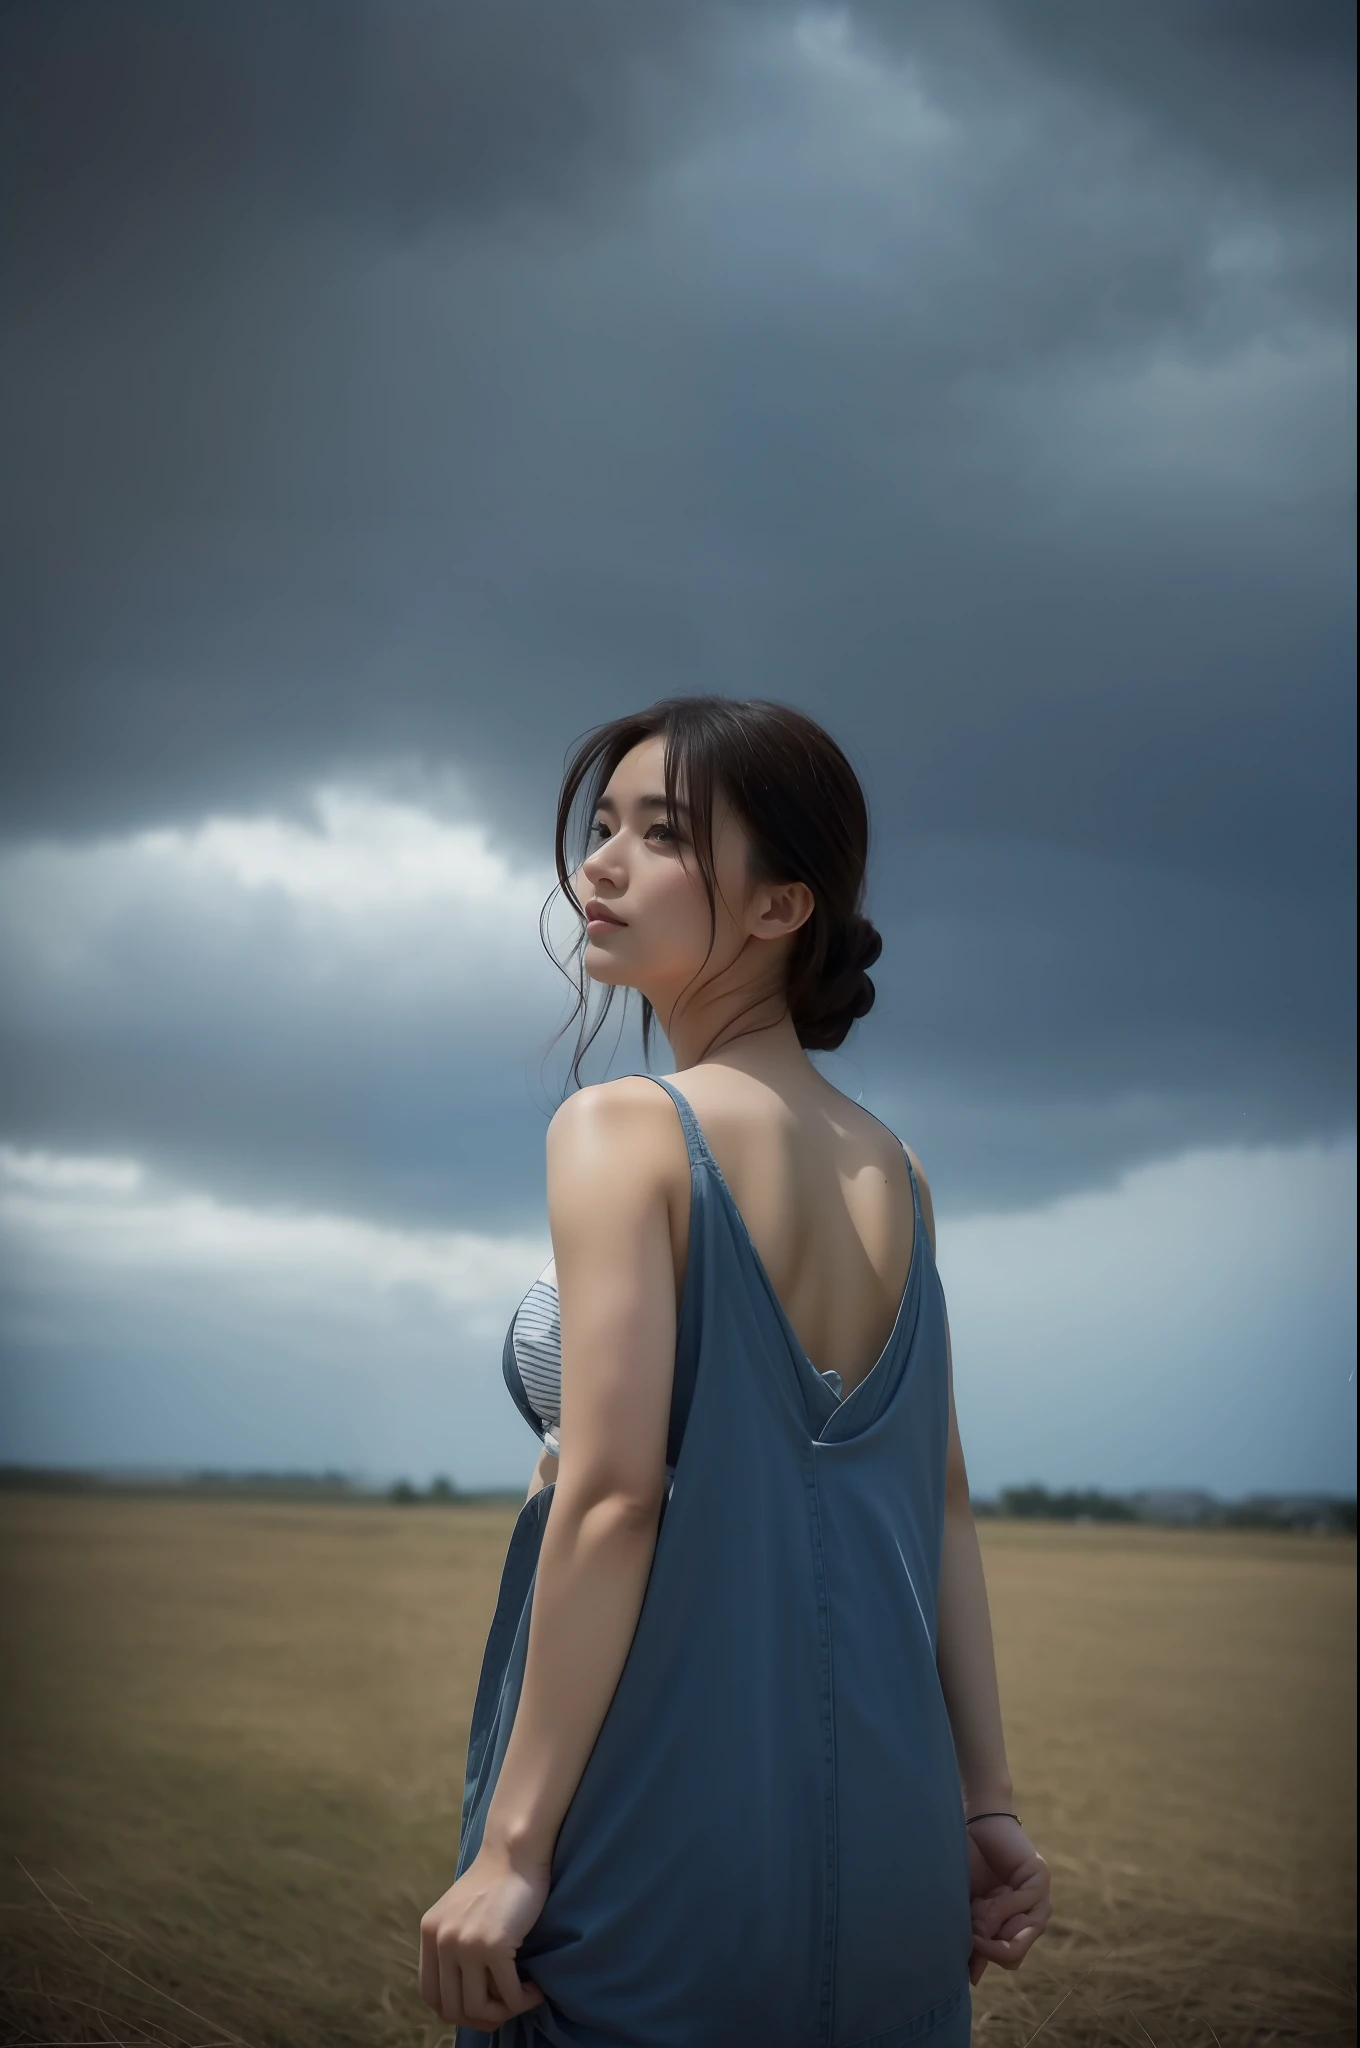 1girl in,Very beautiful 30 year old Japan woman、beautidful eyes、cleavage of the breast、the wind、cloudy ash sky、It's raining a little、Body like a model、The shirt、T back、open one's legs、high-level image quality、Top image quality、Looking at the camera、Focus on the eyes、uninhabited island、